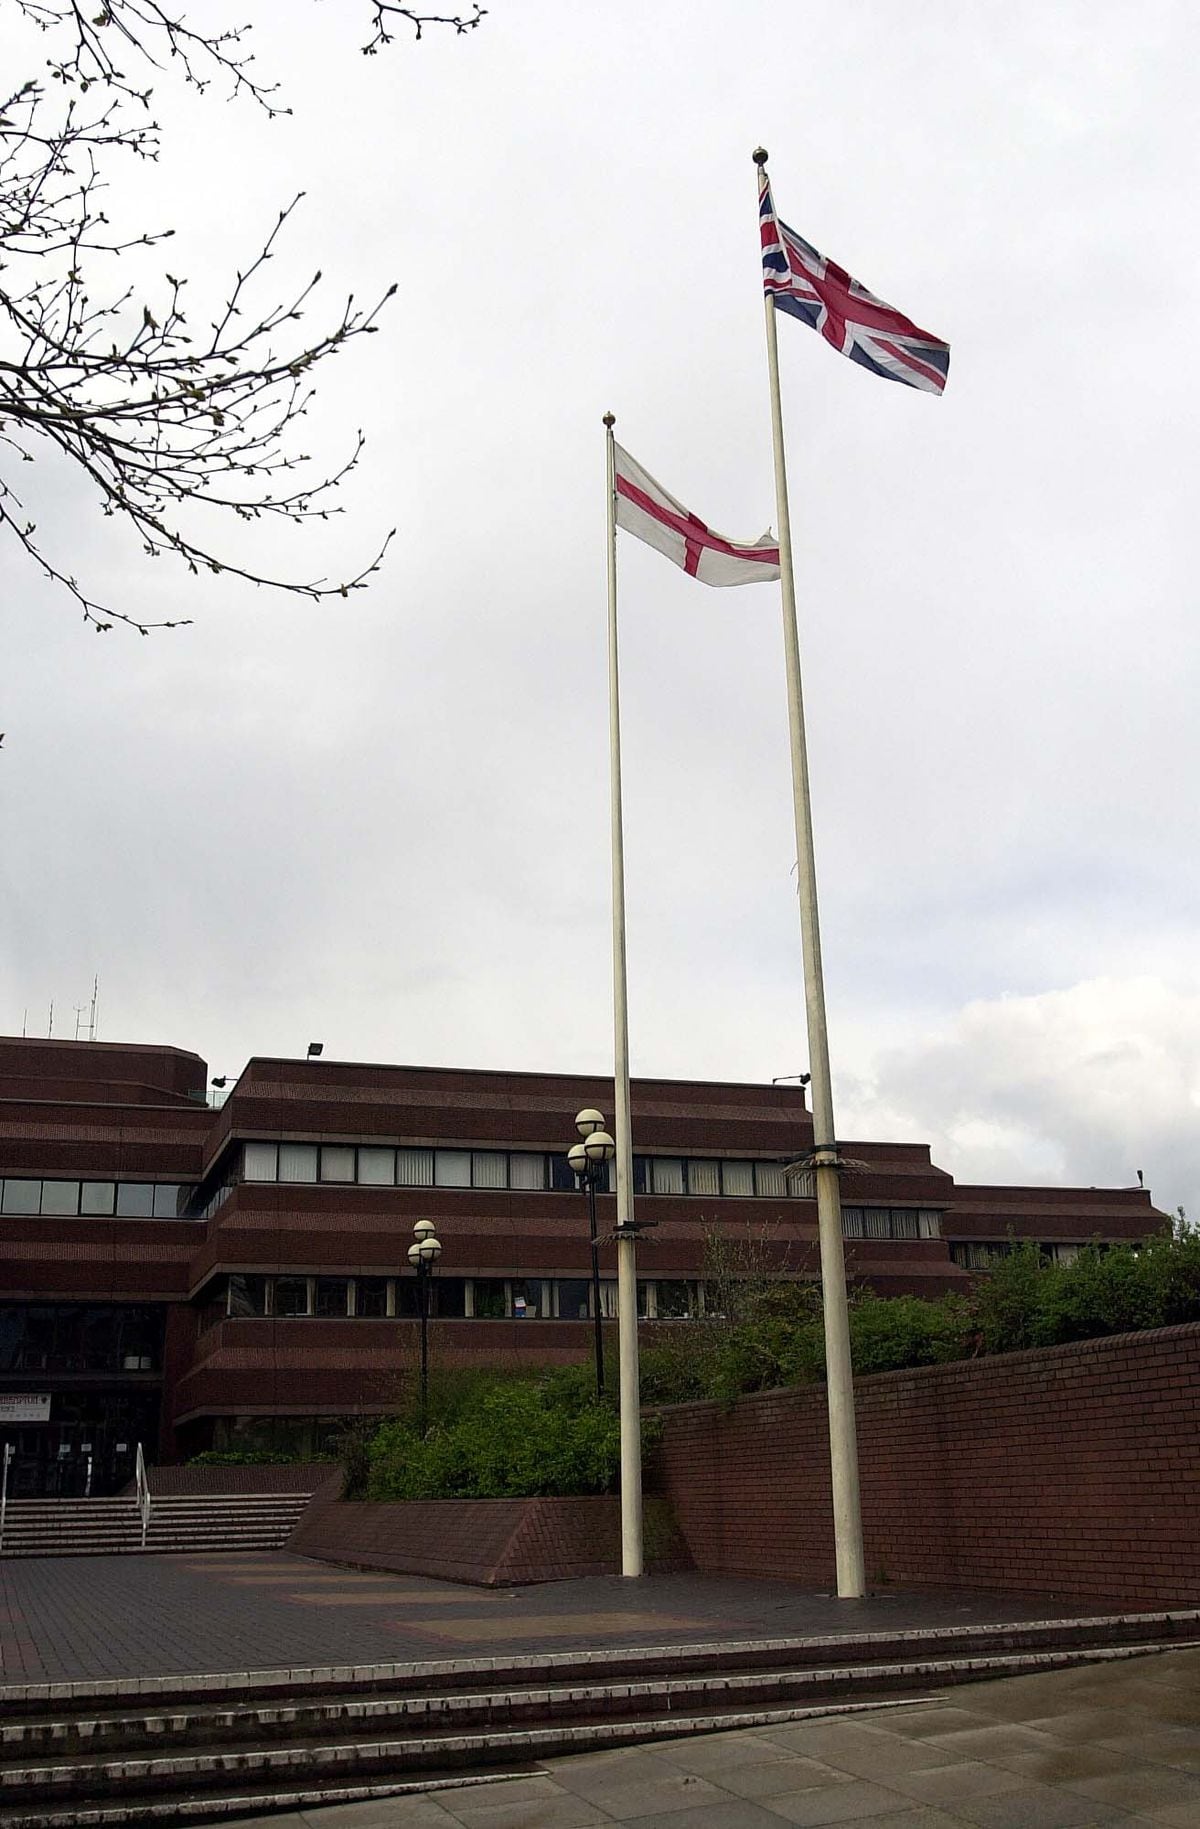 The Union Flag and the St George's flag have been flown outside the Civic Centre in the past